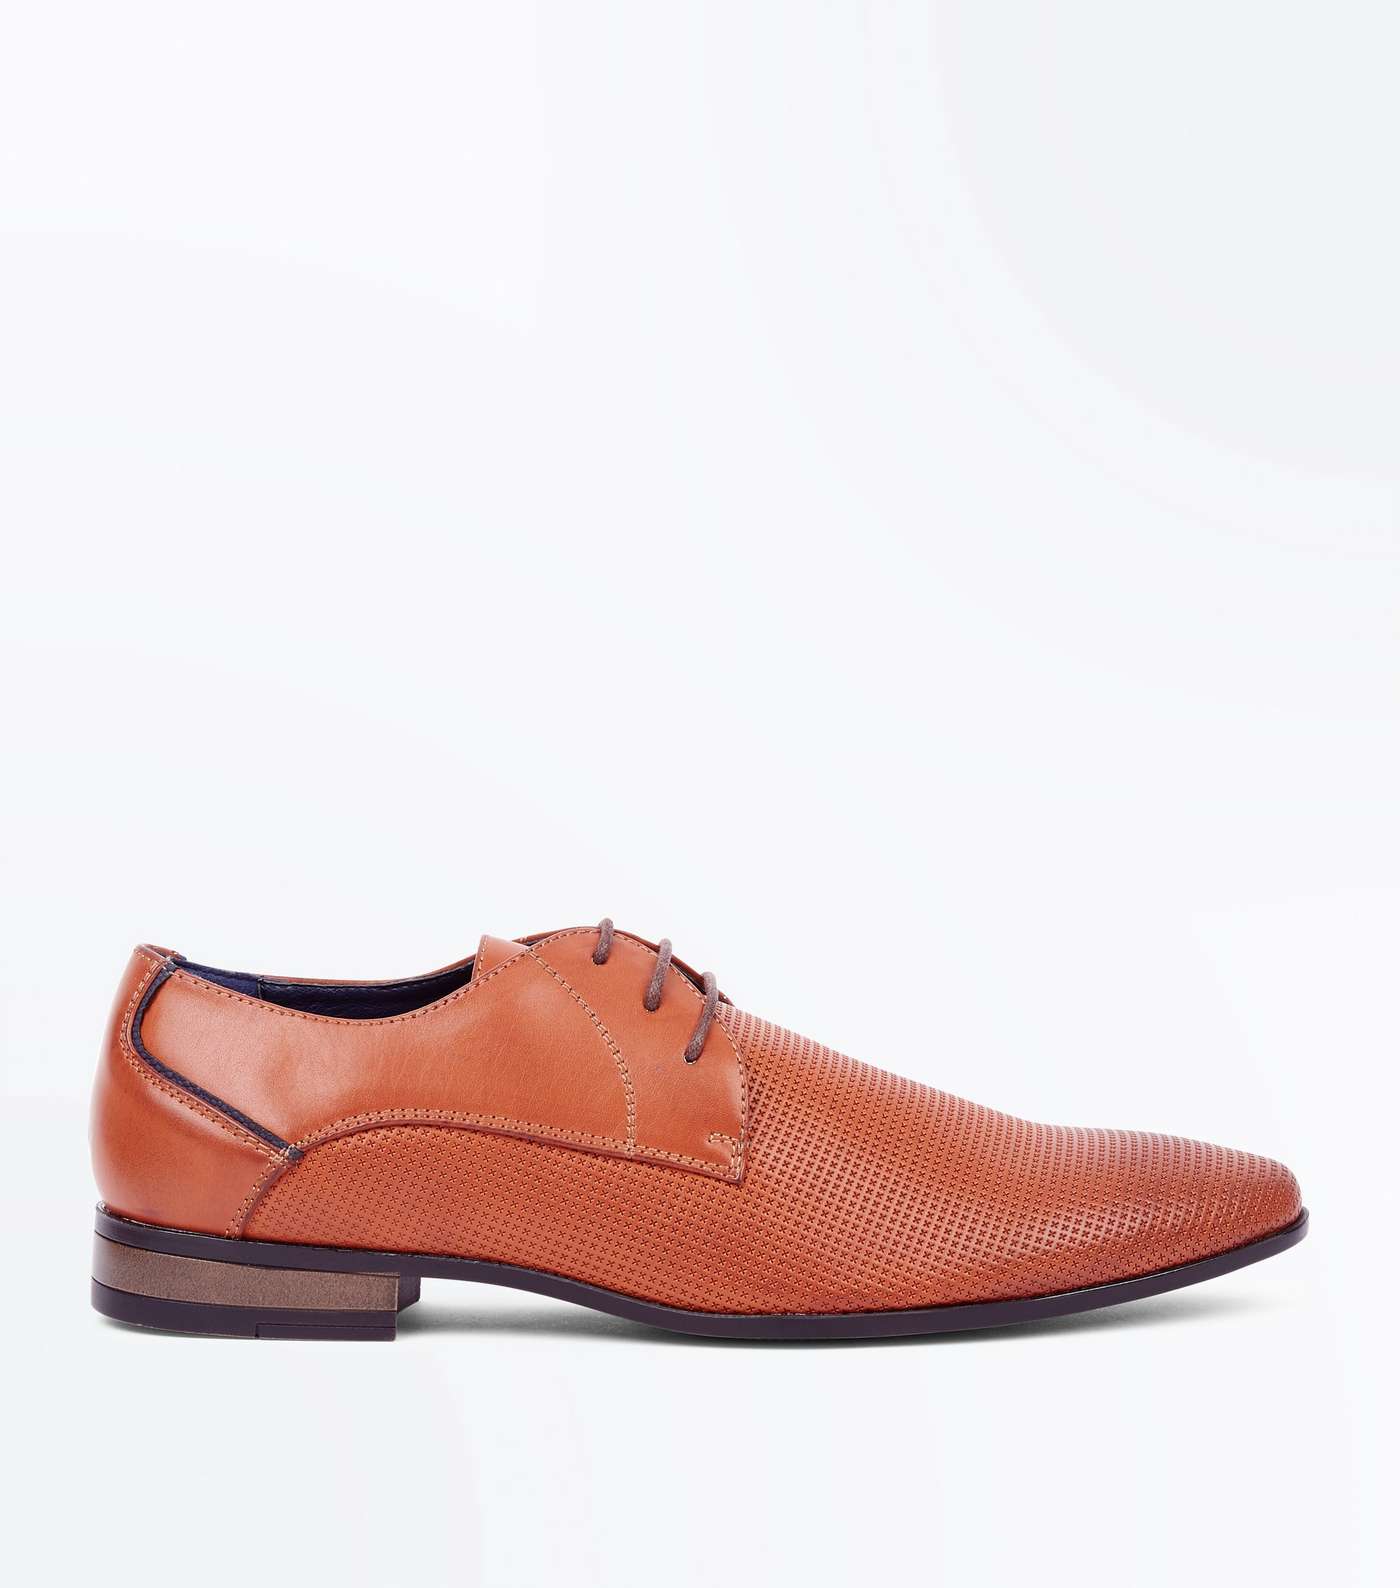 Tan Lace Up Formal Gibson Shoes